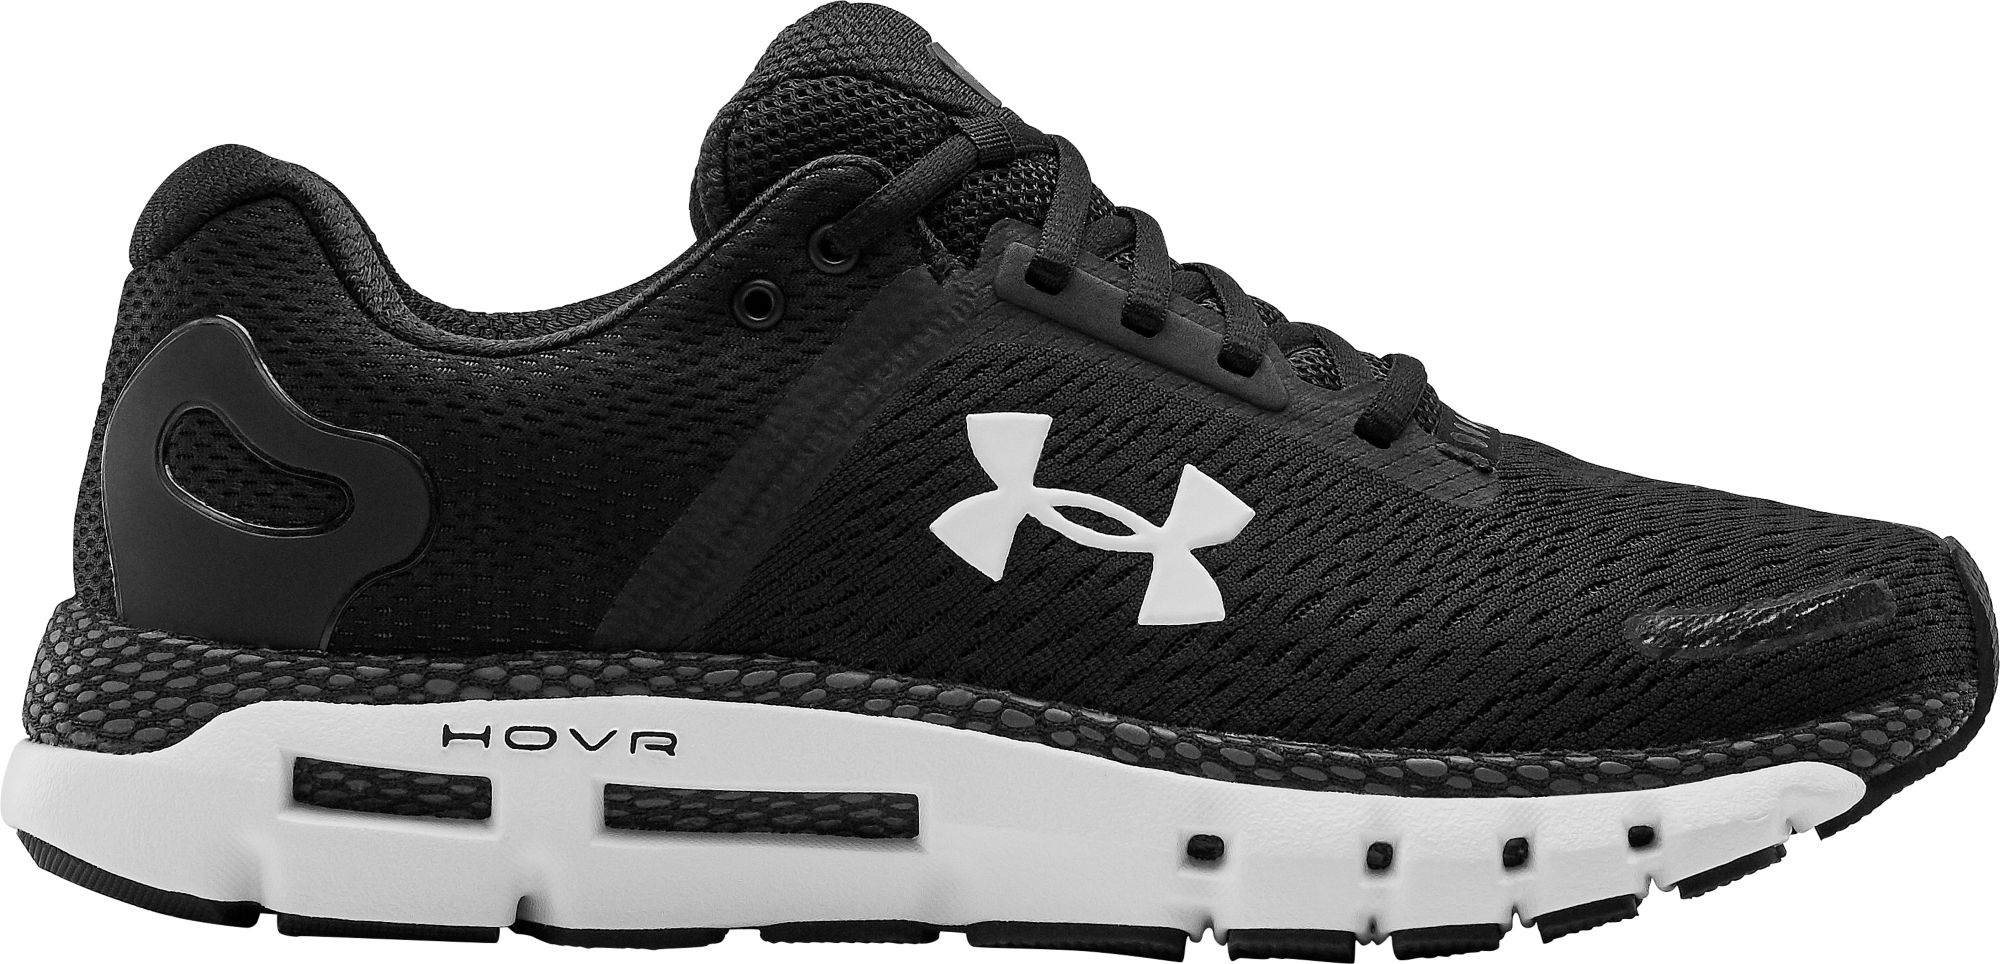 under armor black and white shoes